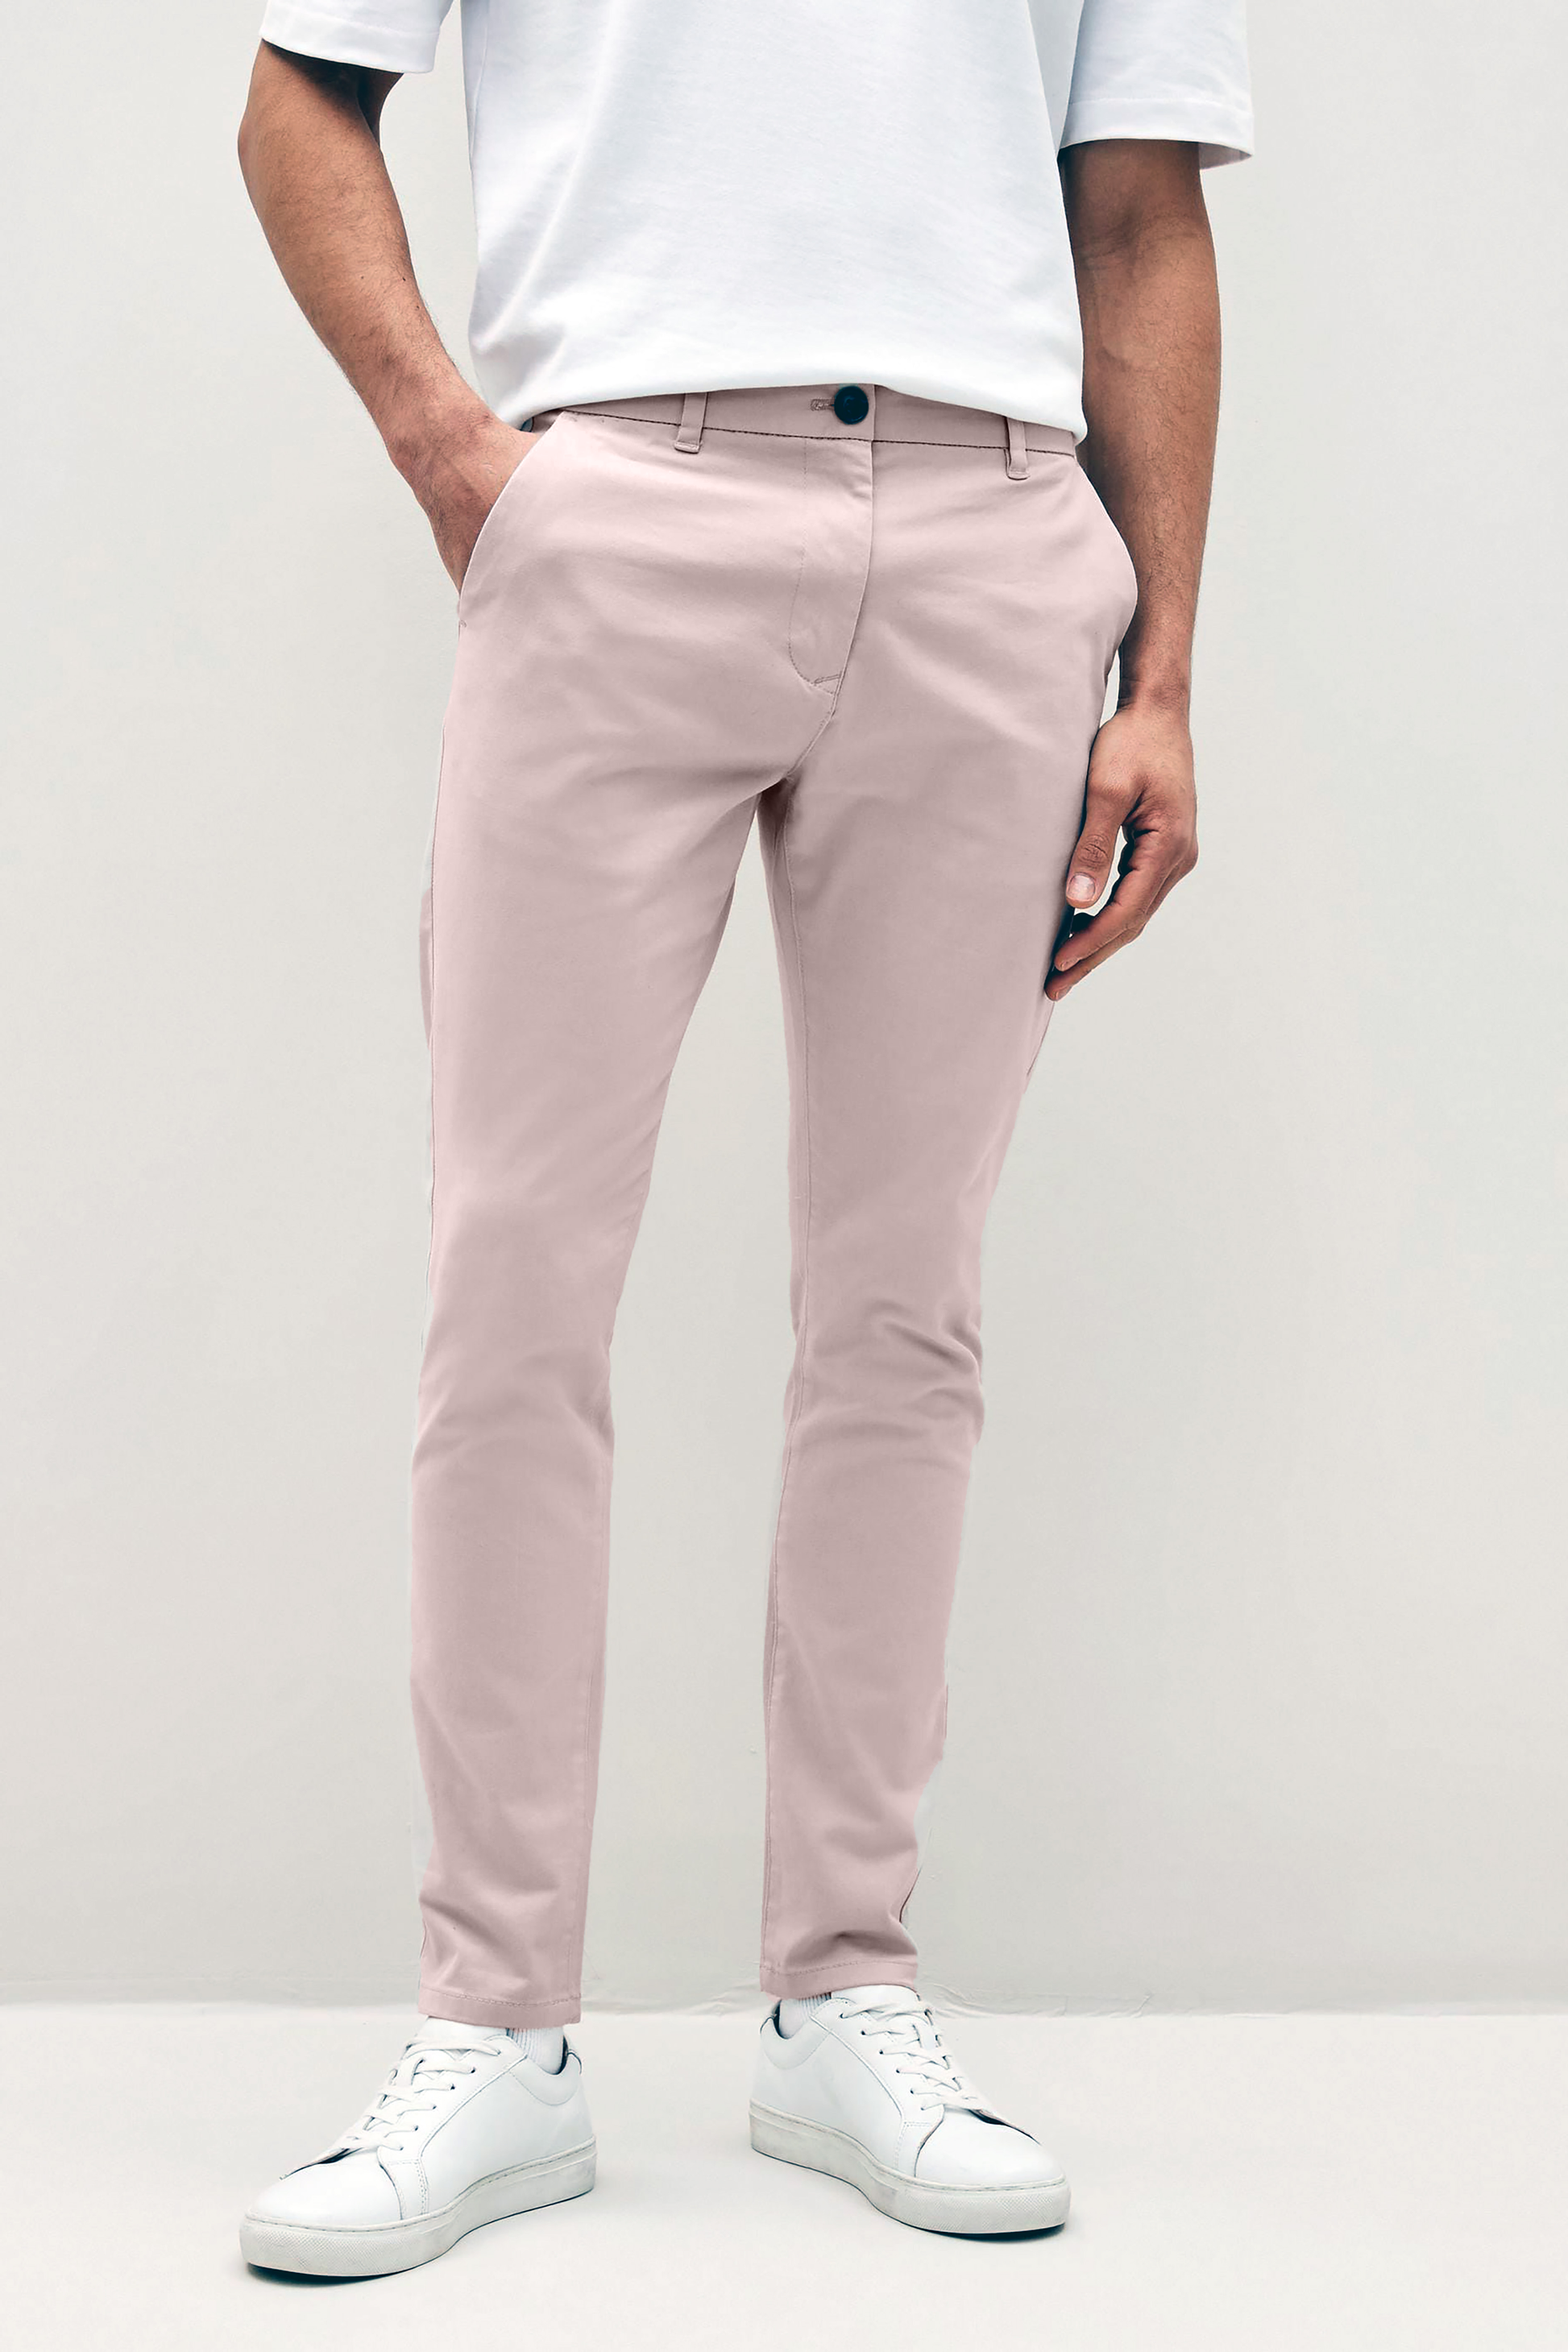 Mens pale pink chinos with front slanted pockets, jetted back pockets. zip fly fastening and brown horne buttons on the waistband and back pockets, the fit is a slim fit, this is worn with a white tee and white unbranded trainers